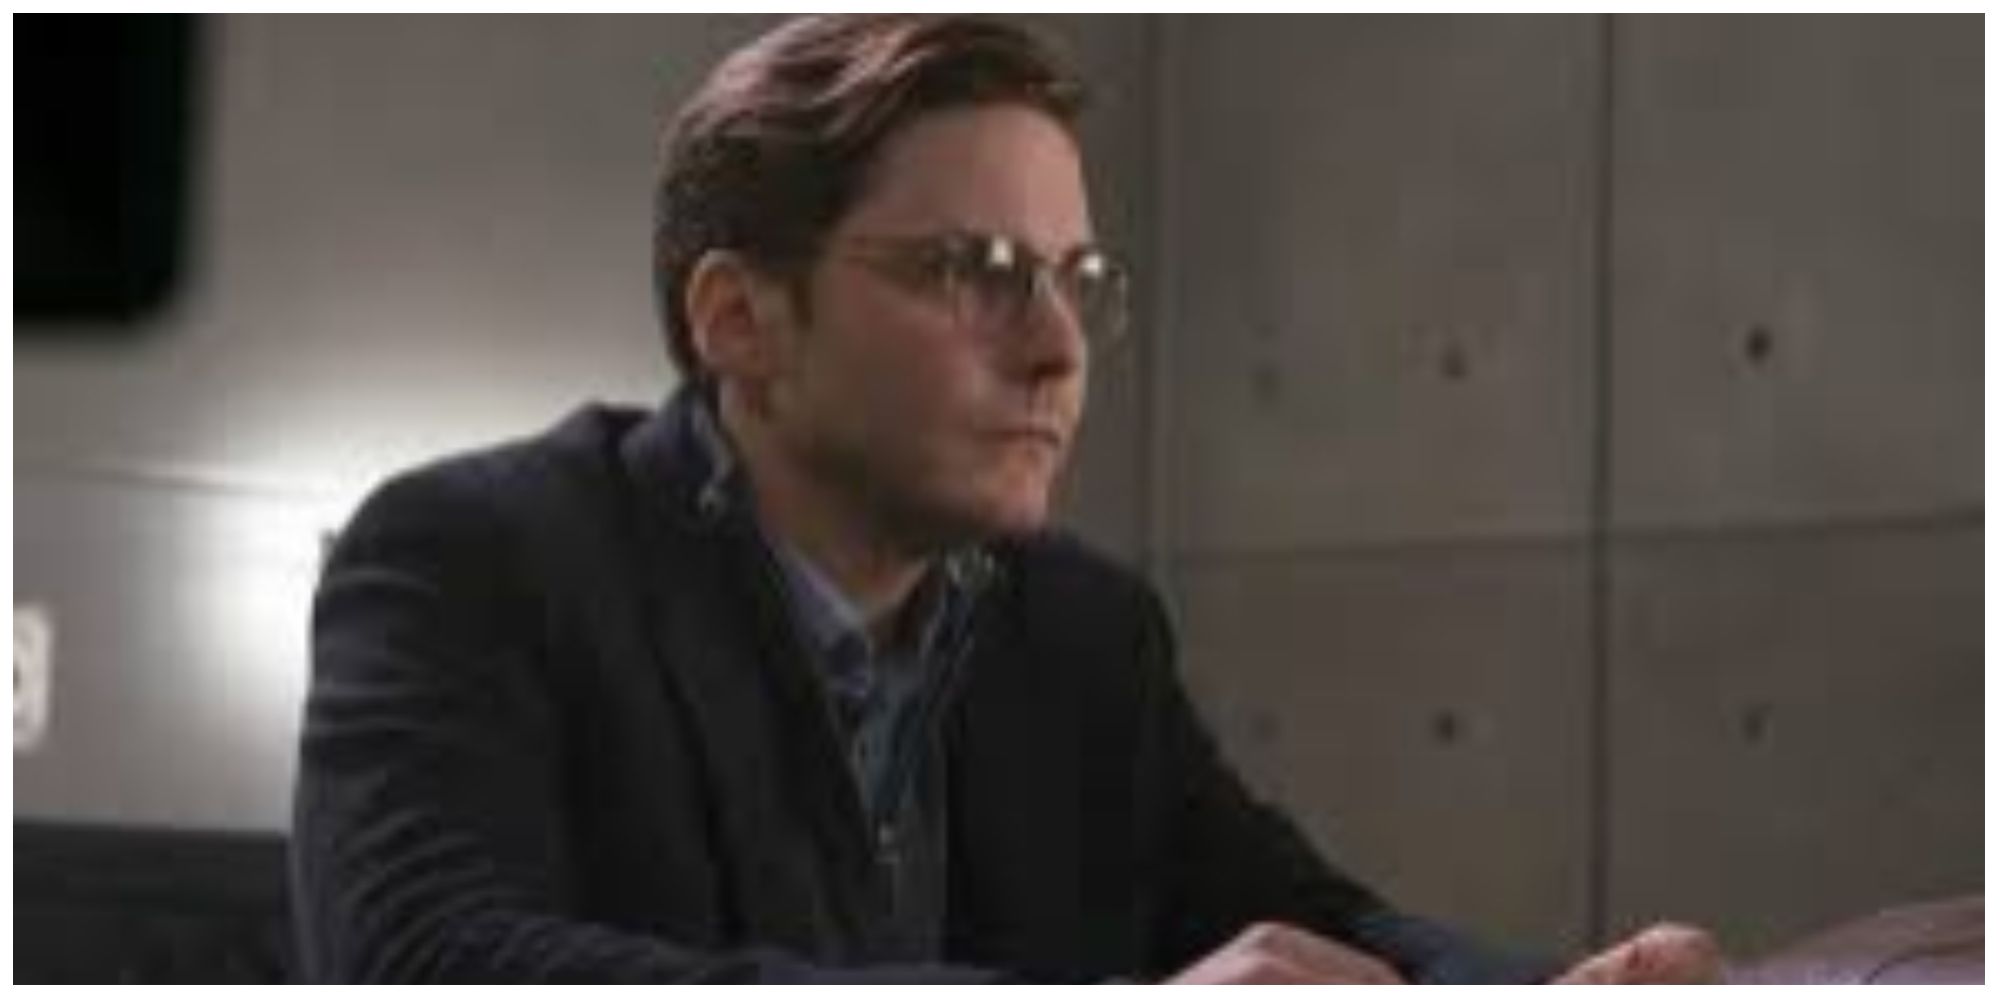 Helmut Zemo seated at table